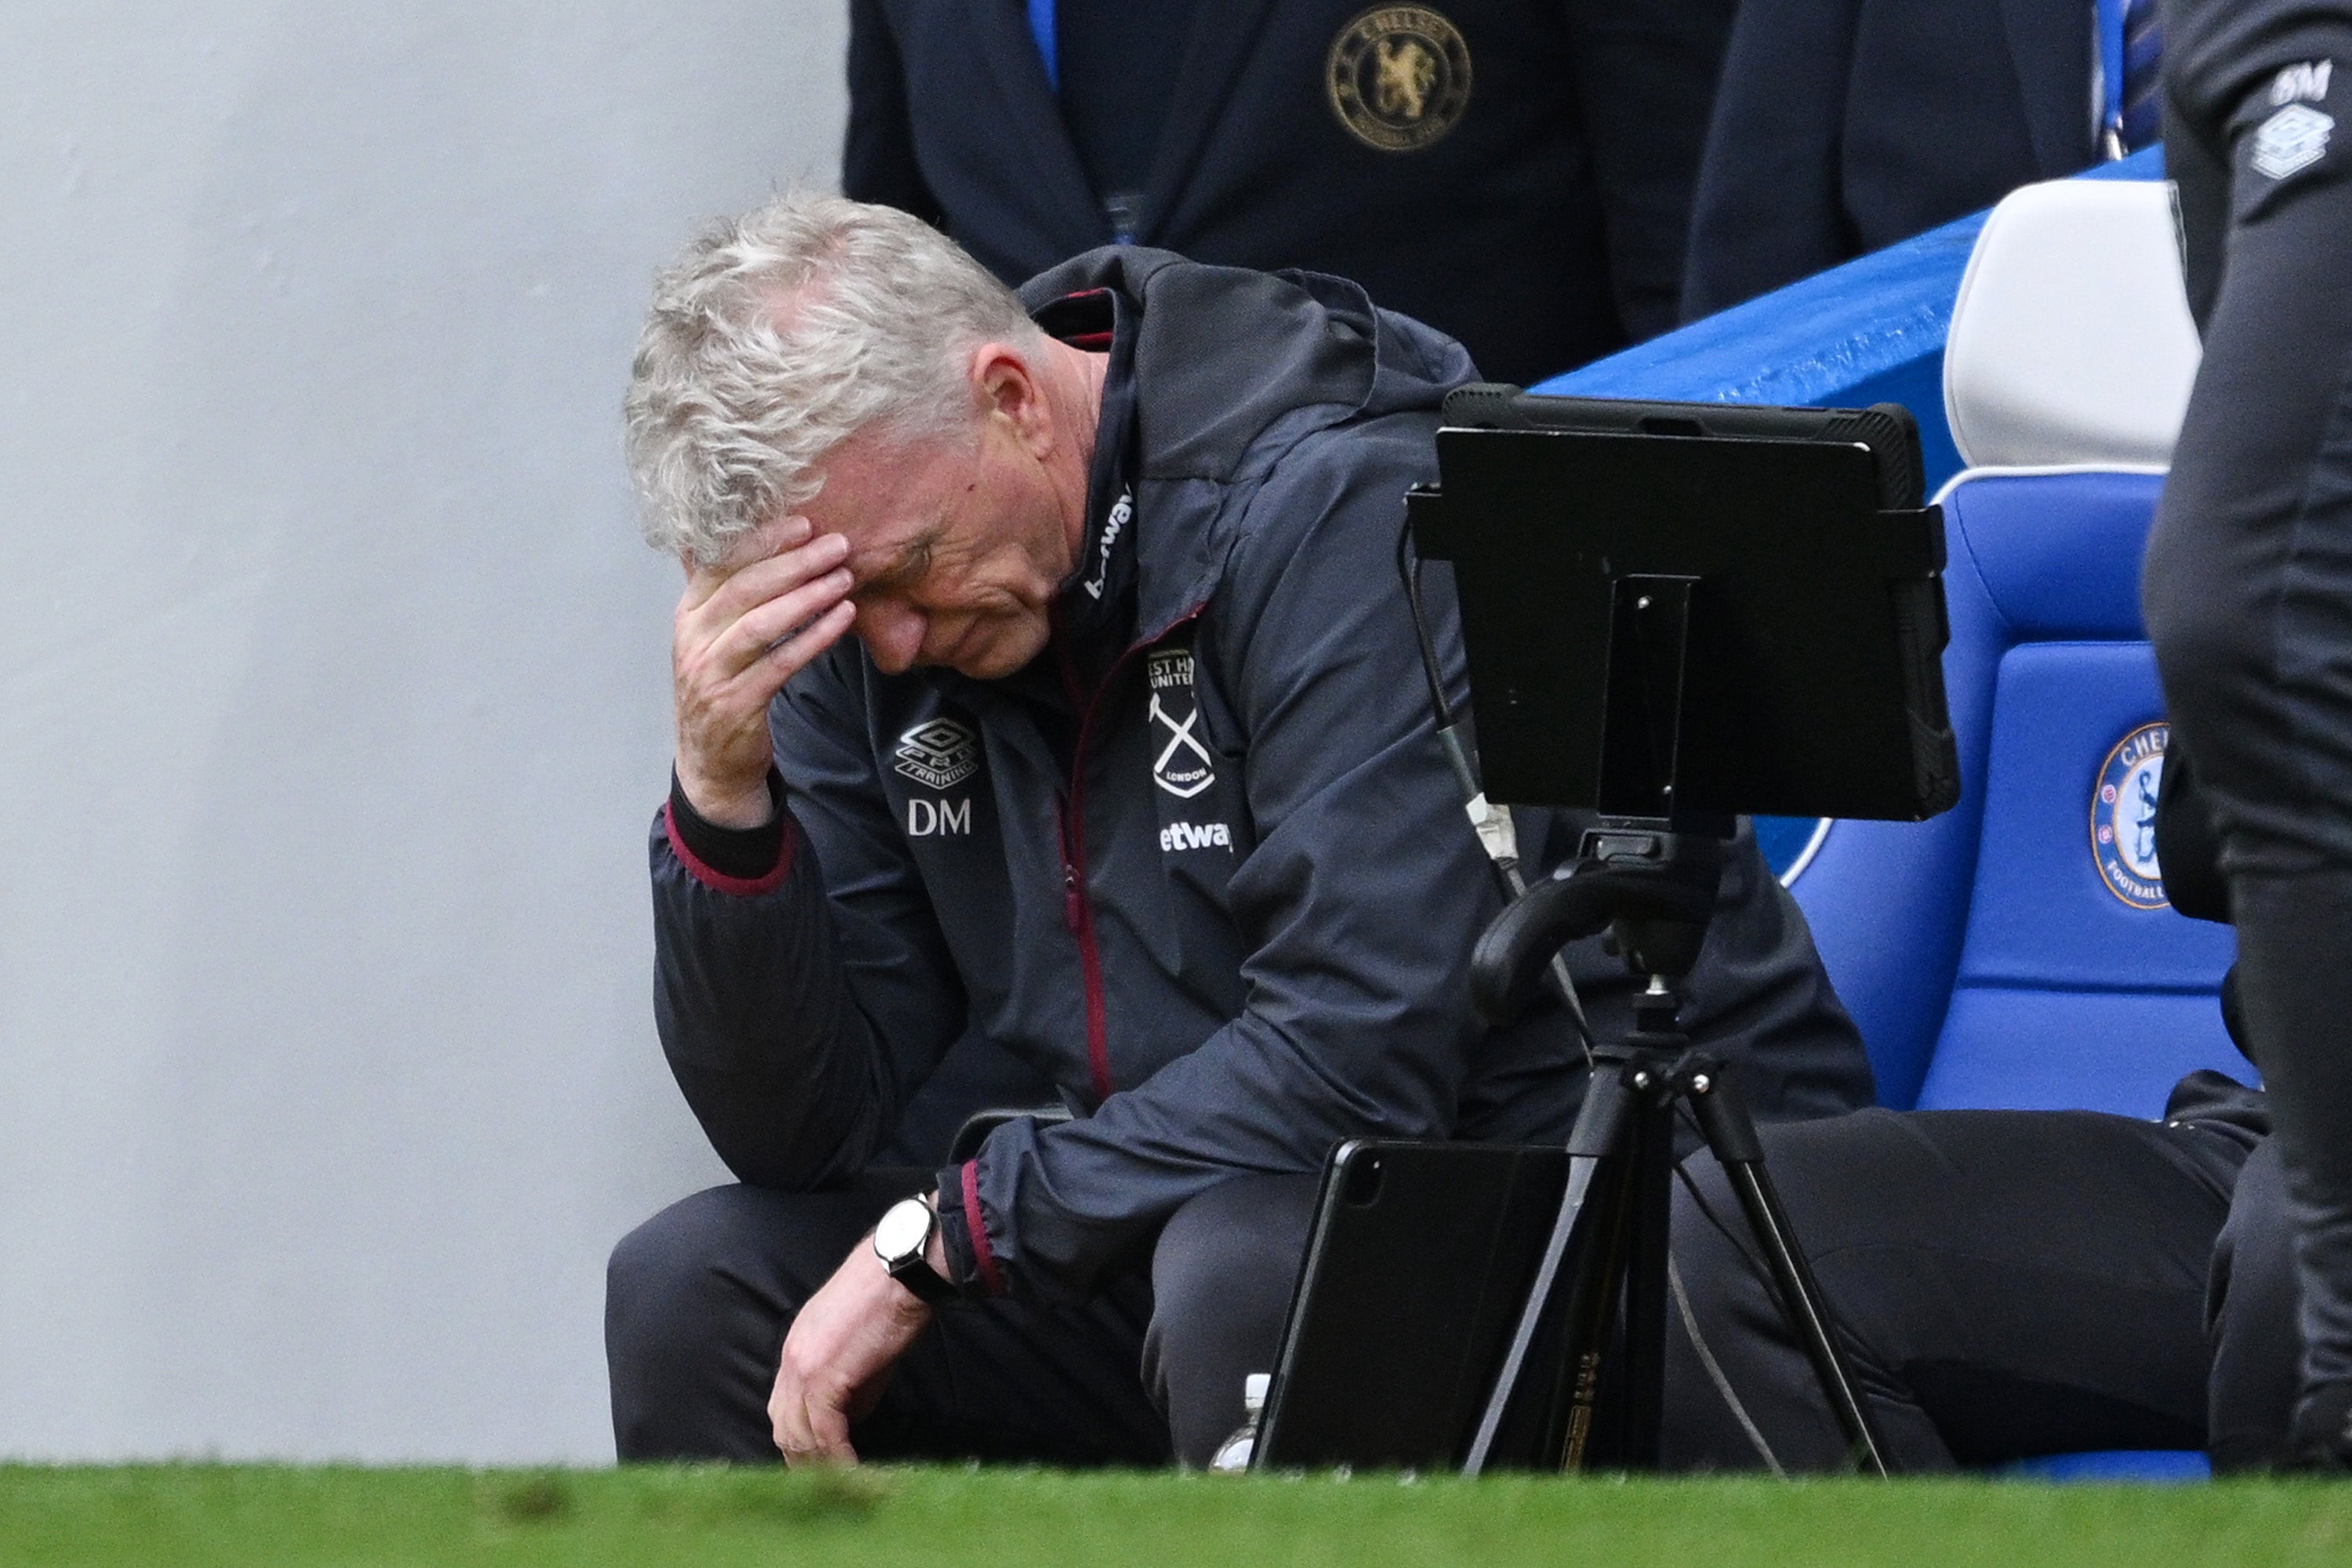 Moyes has two games remaining following the 5-0 thrashing at Chelsea